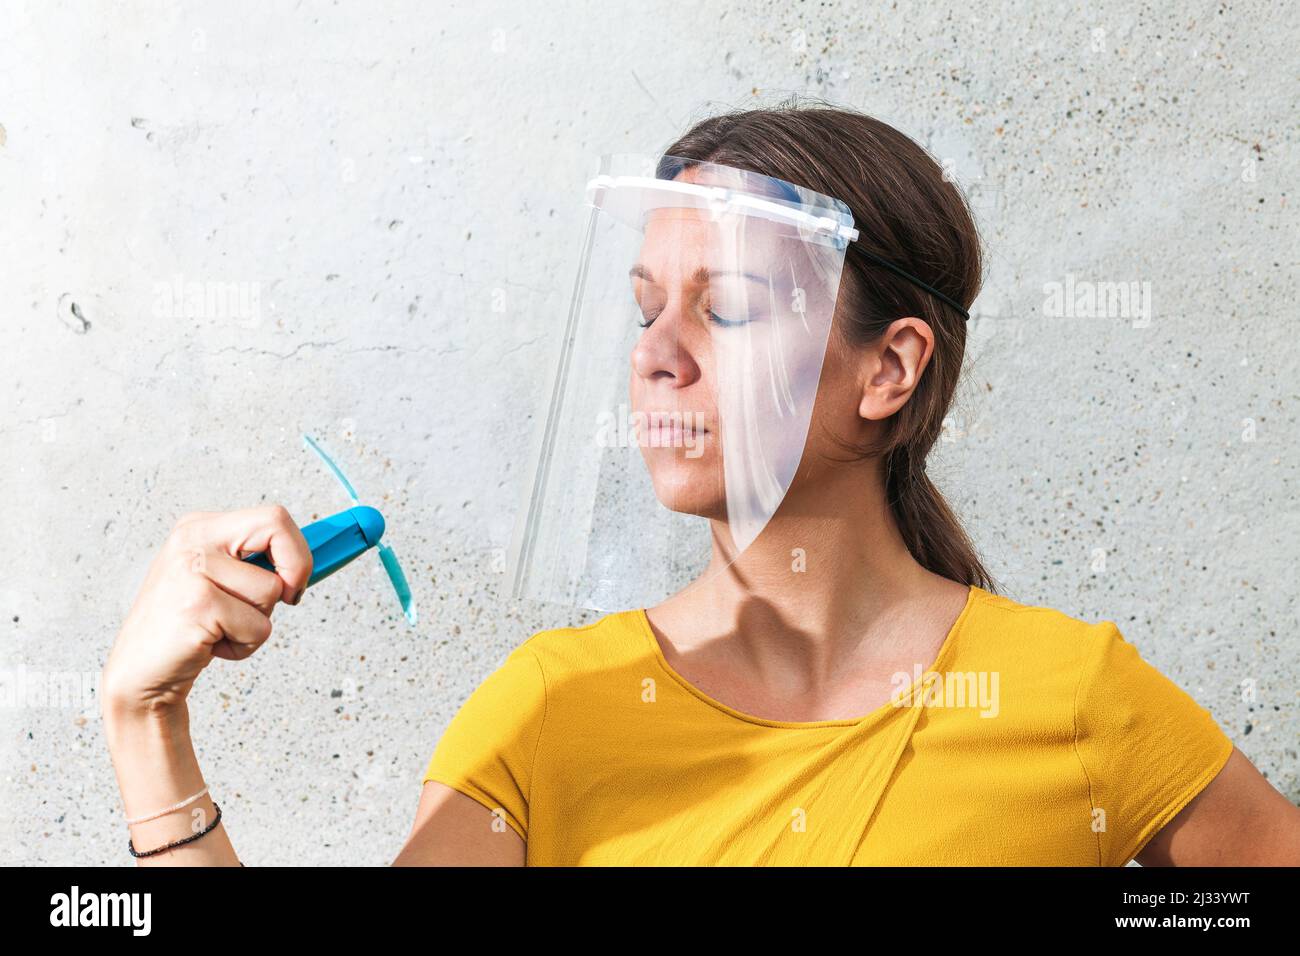 young woman cooling down with hand held ventilator while wearing a protective visor Stock Photo